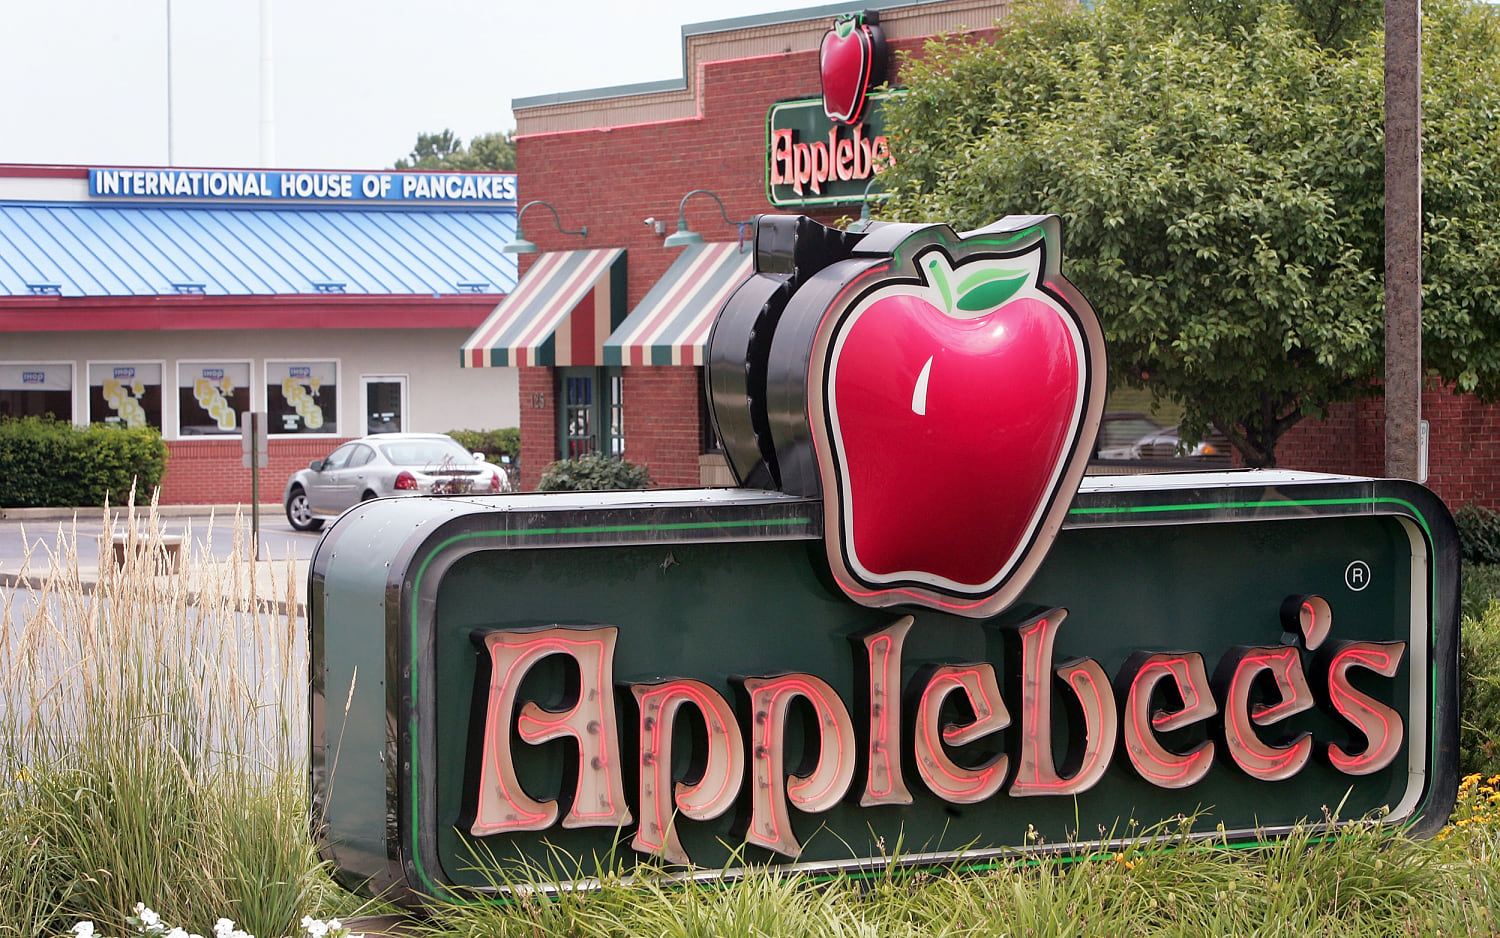 Applebee’s to close up to 35 restaurants this year: What’s happening in the Neighborhood?